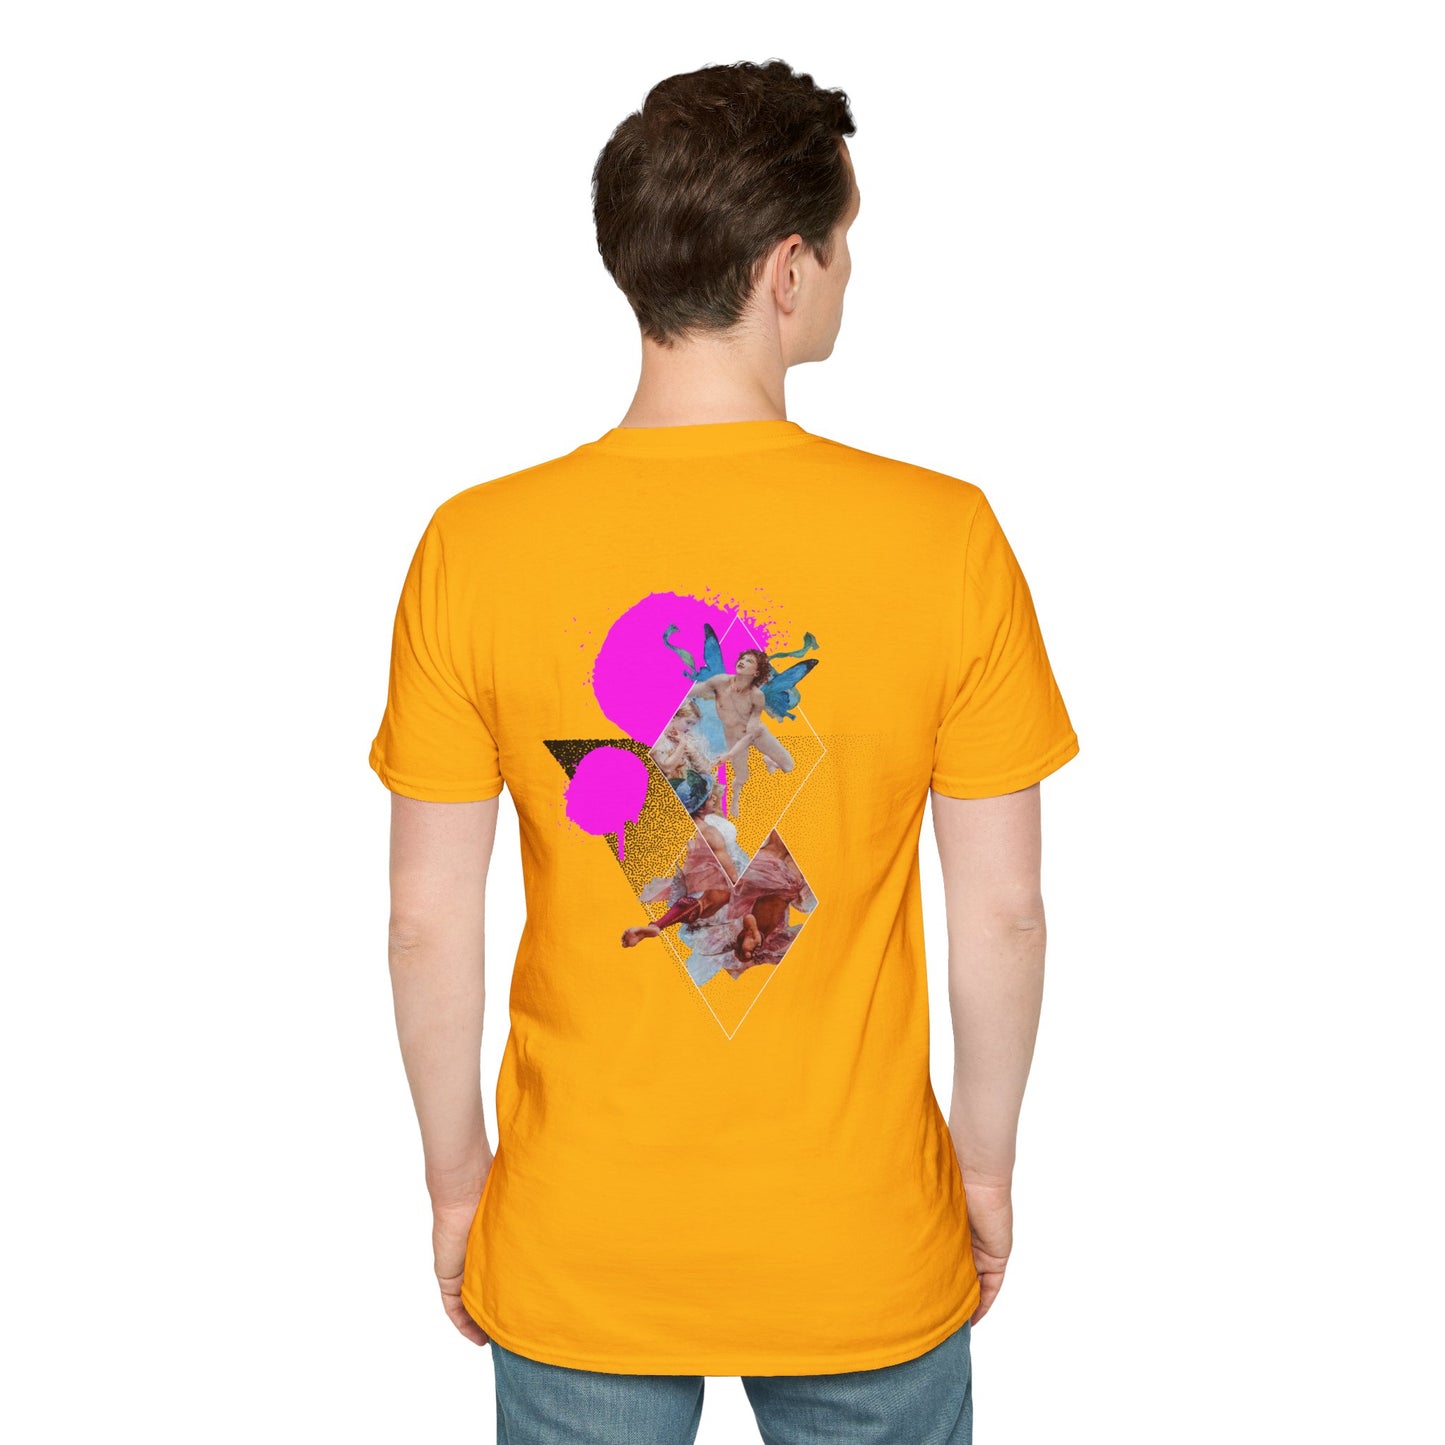 Yellow T-shirt with a surreal collage of butterflies in spray paint design